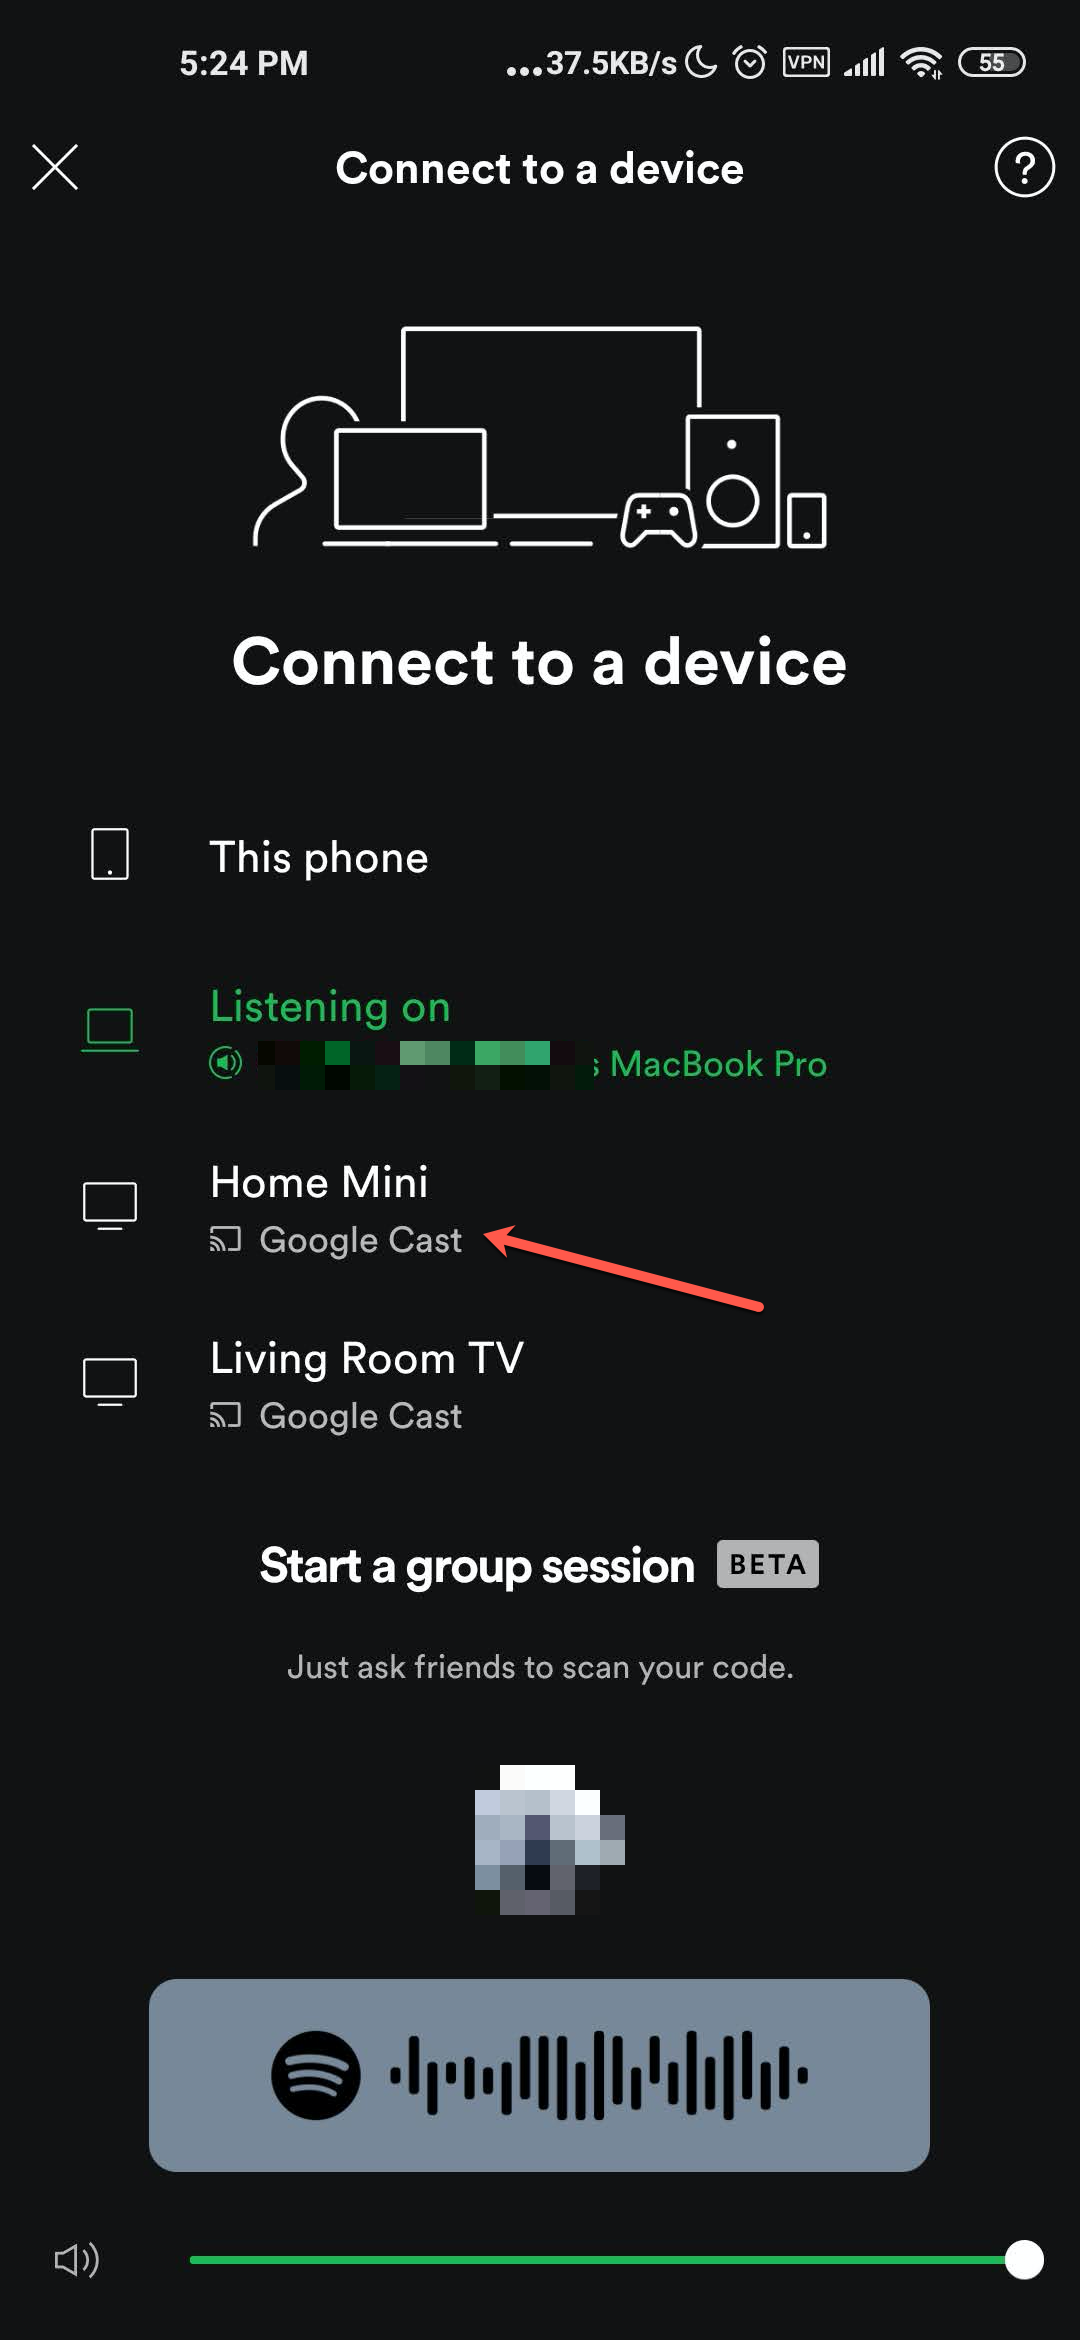 Spotify on Desktop doesn't see Google Home Mini - The Spotify Community